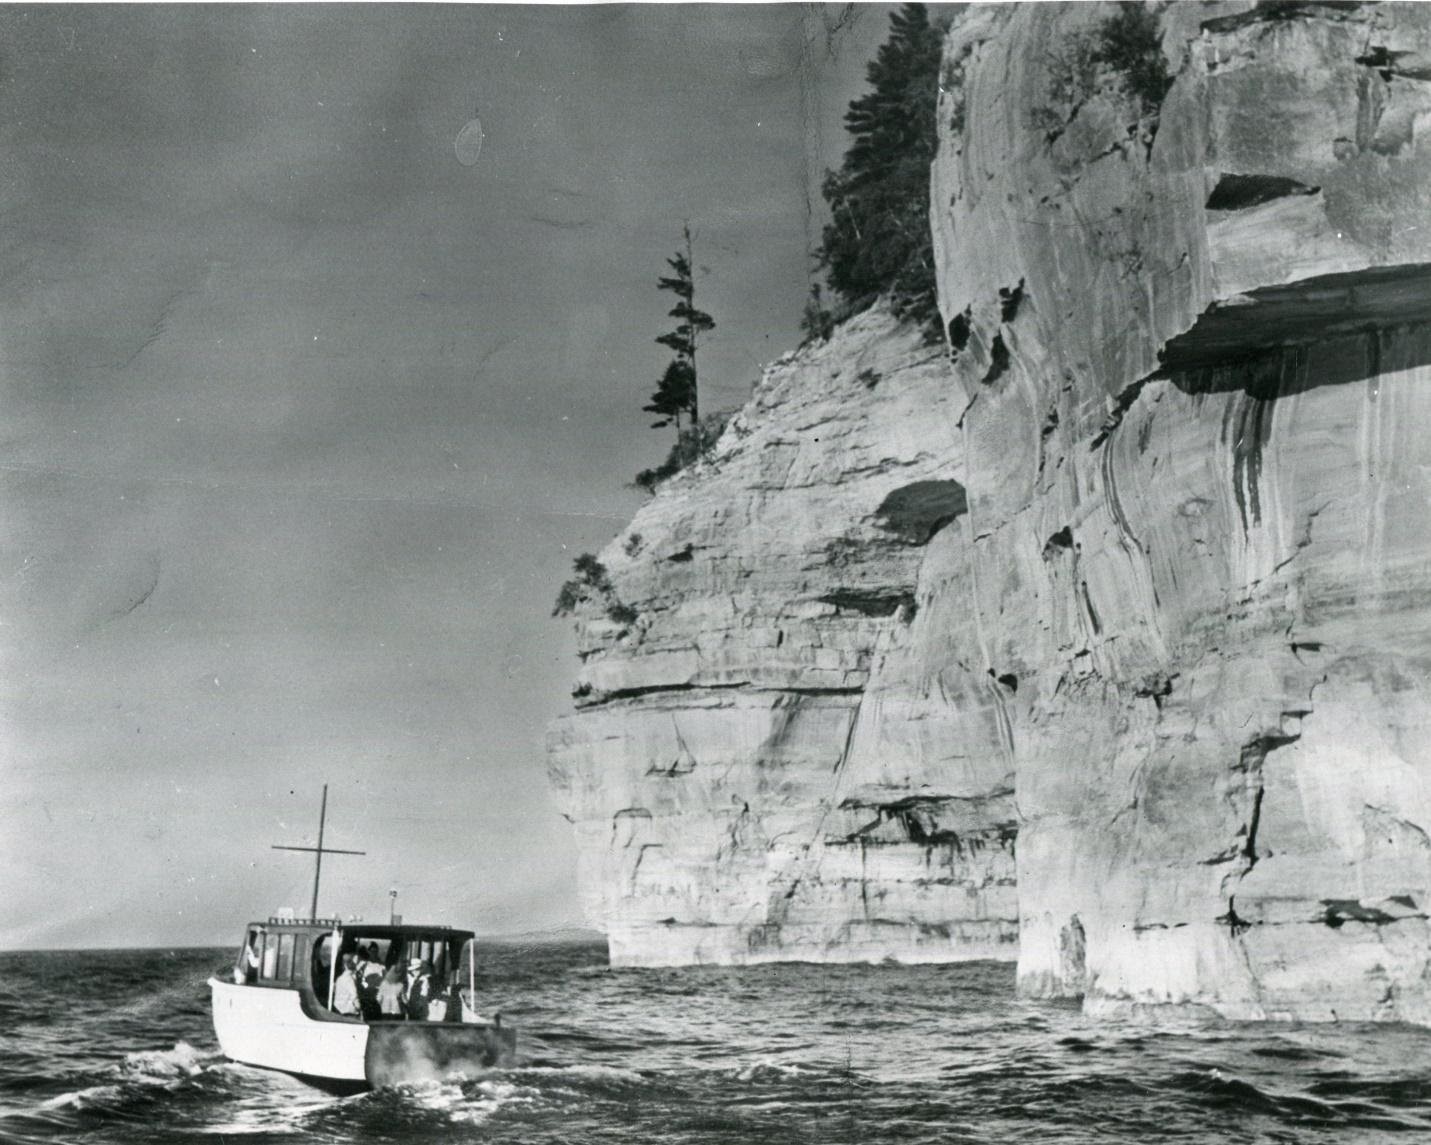 Touring the Pictured Rocks: Then to Now